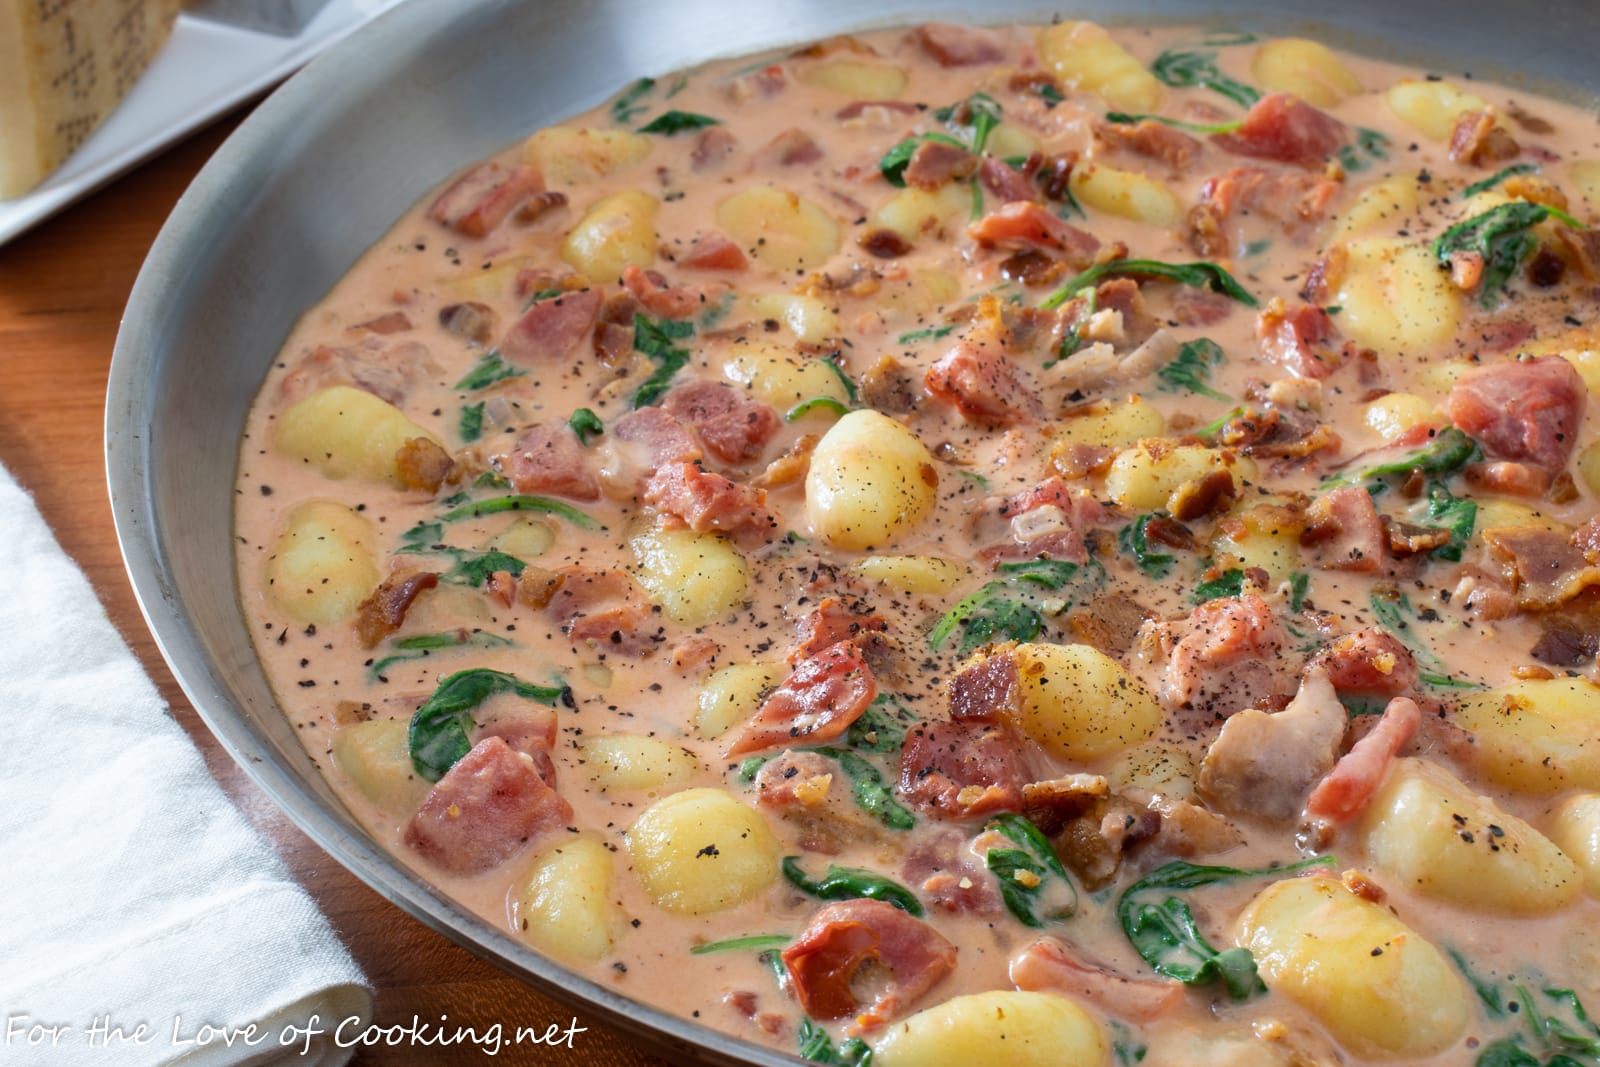 Gnocchi with Bacon and Spinach in a Tomato Cream Sauce